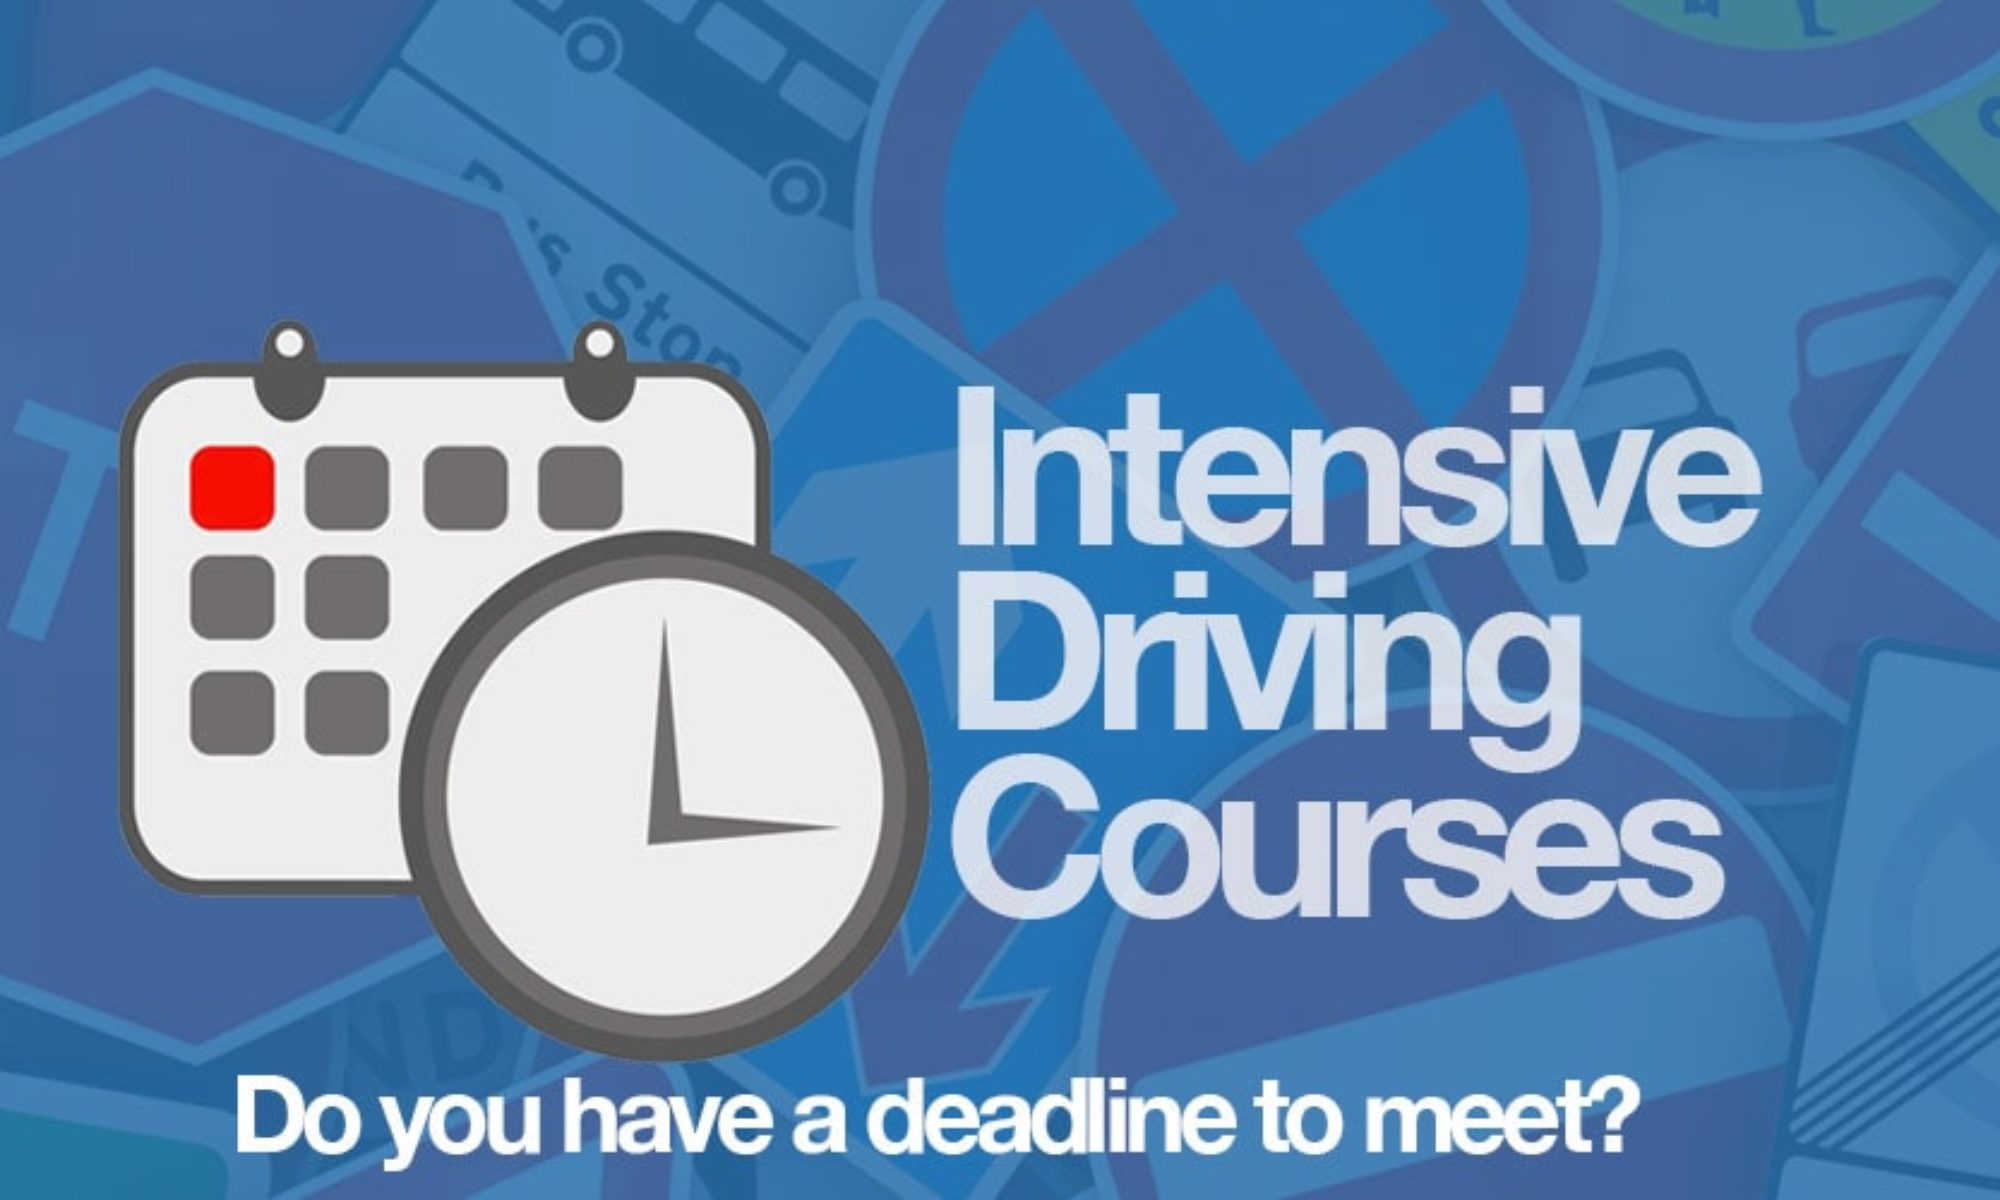 Intensive Courses